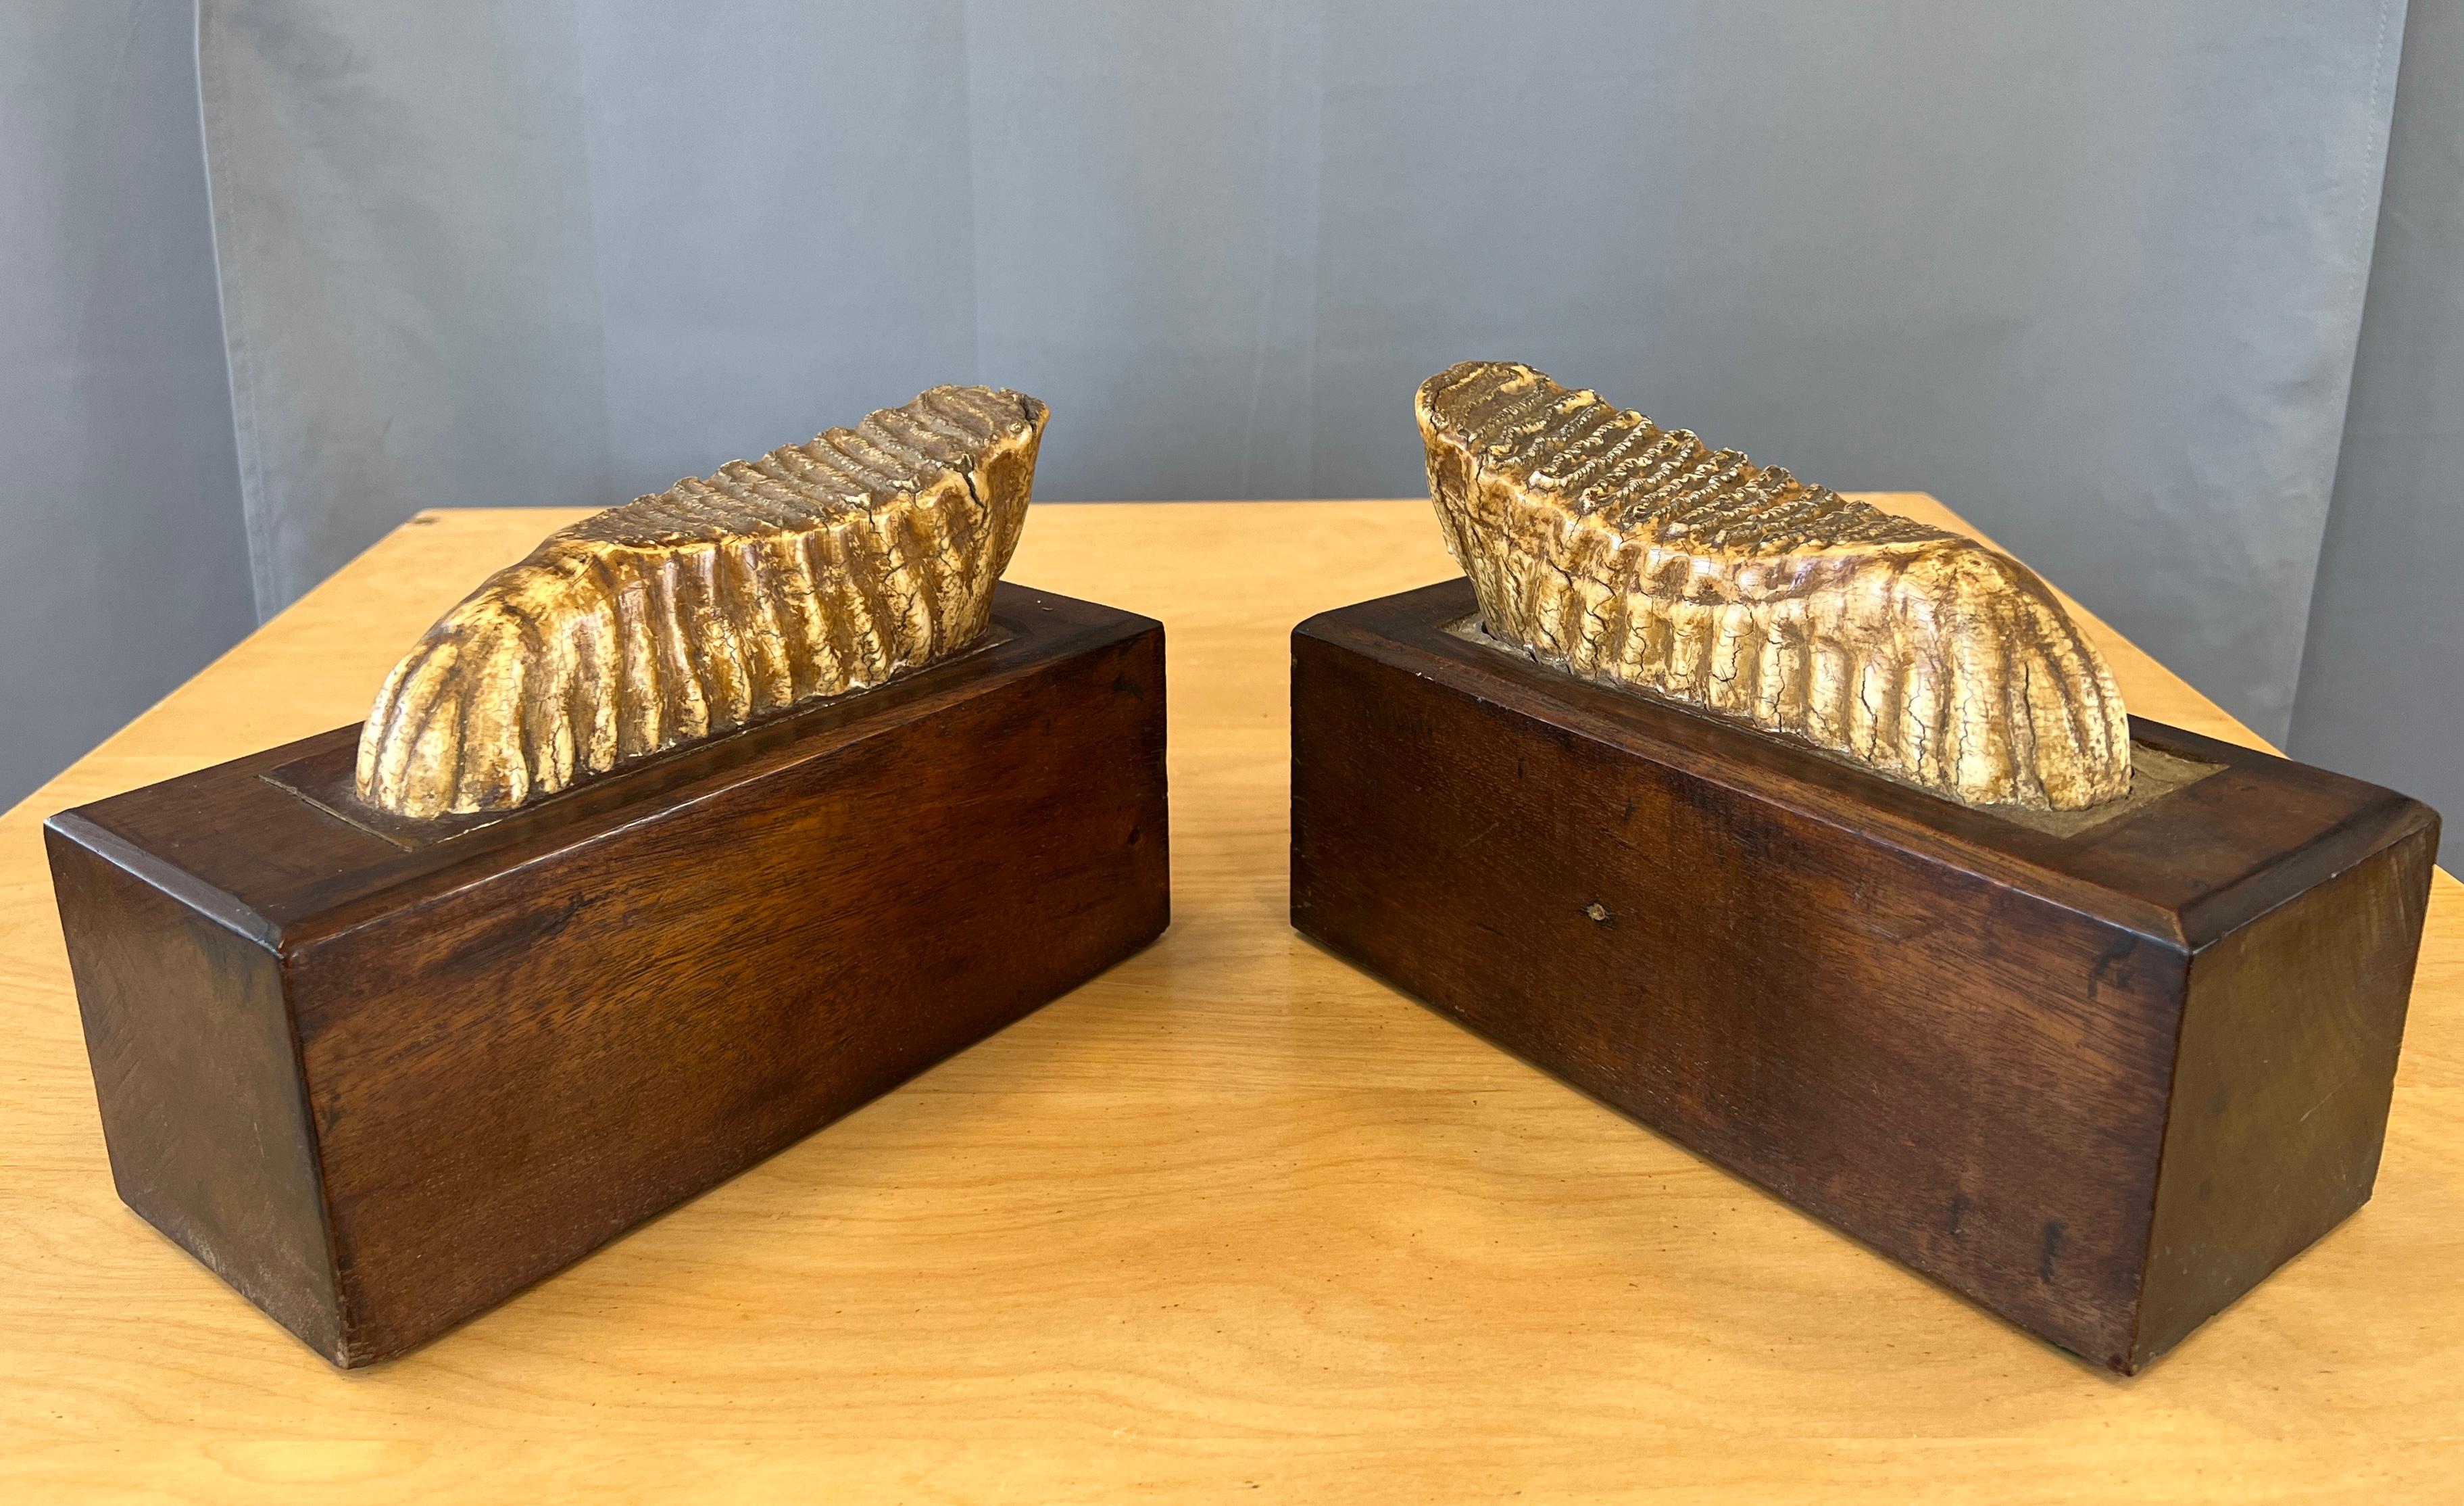 Pair of impressive mounted Woolly Mammoth teeth bookends. 
Each tooth is set into a carved out block of wood, then the hole was fill and teeth surround with a cement type of filling. 
Over this a cover of some sort of element, with one tooth's